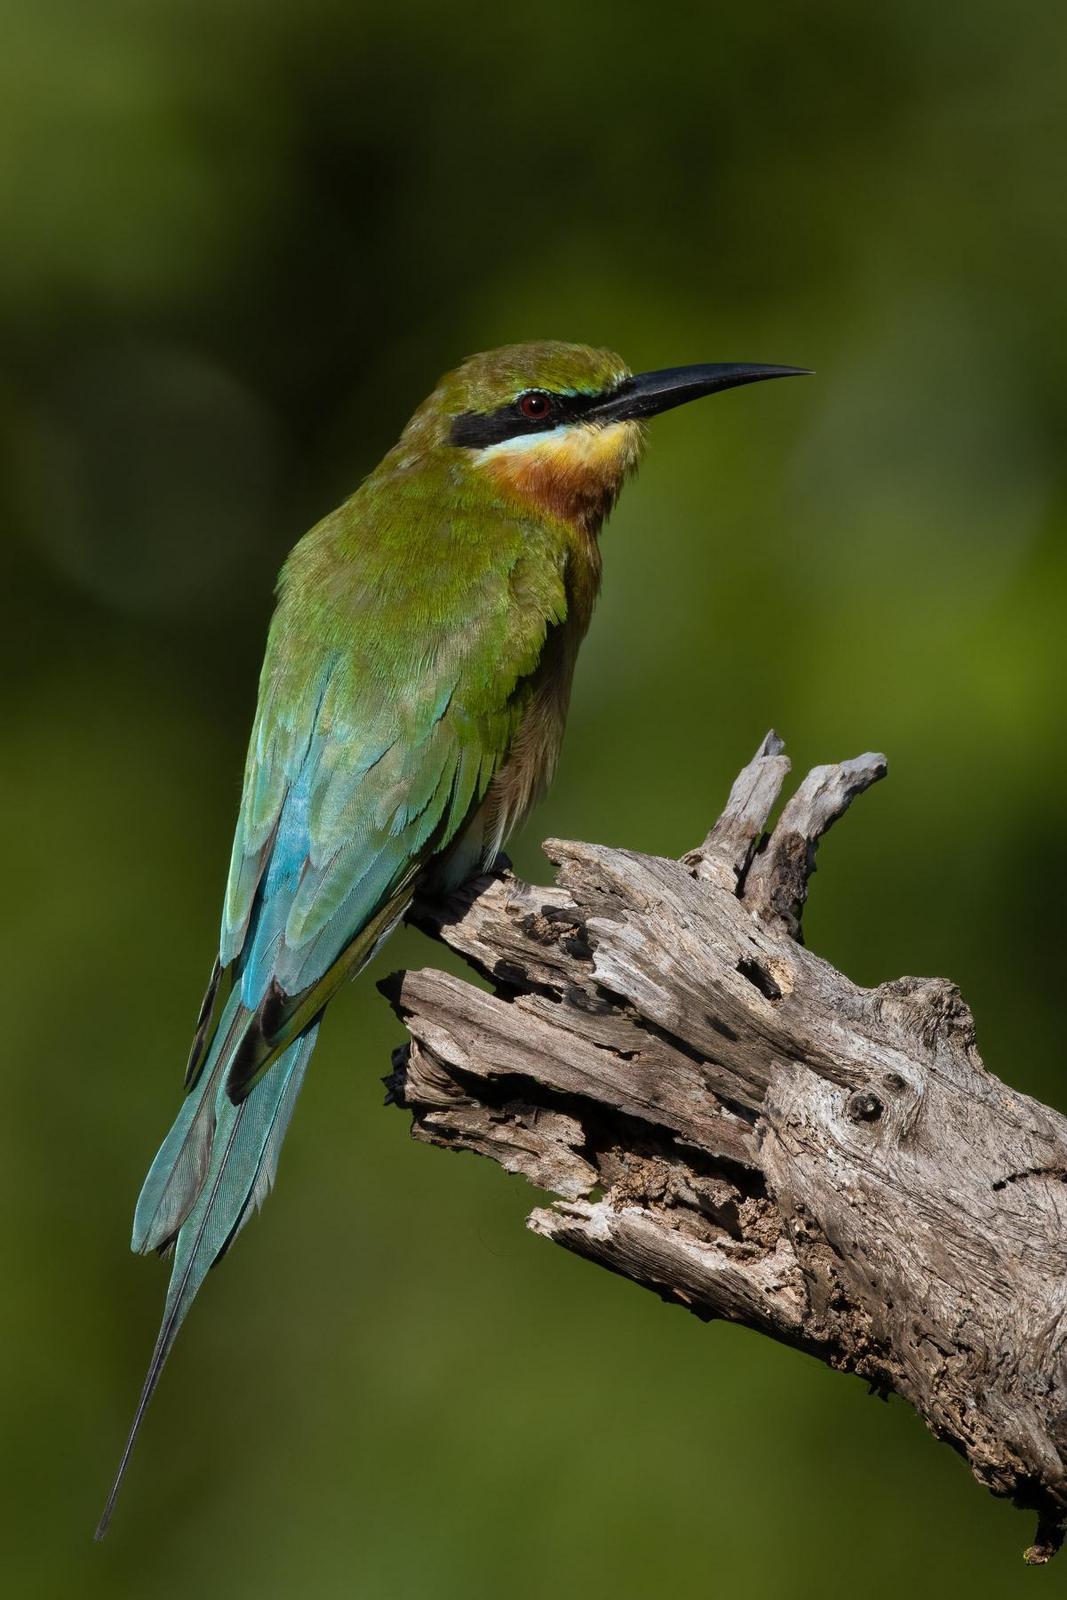 Blue-tailed Bee-eater Photo by Julie Edgley